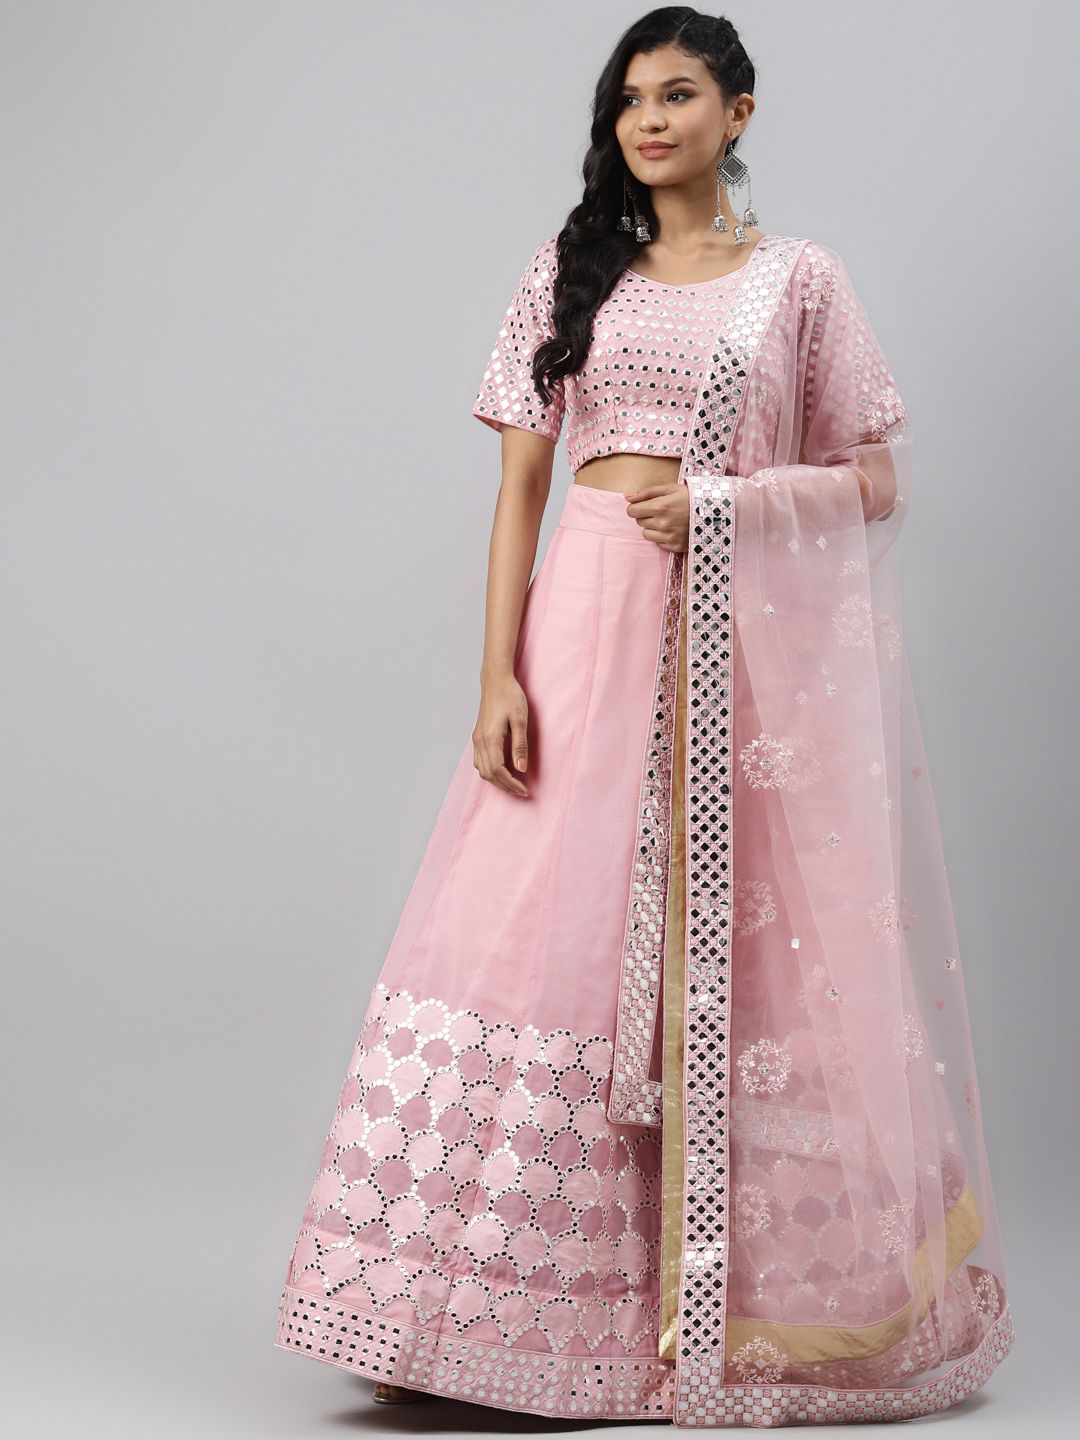 Readiprint Fashions Pink & Silver-Toned Embroidered Semi-Stitched Lehenga & Unstitched Blouse with Dupatta Price in India